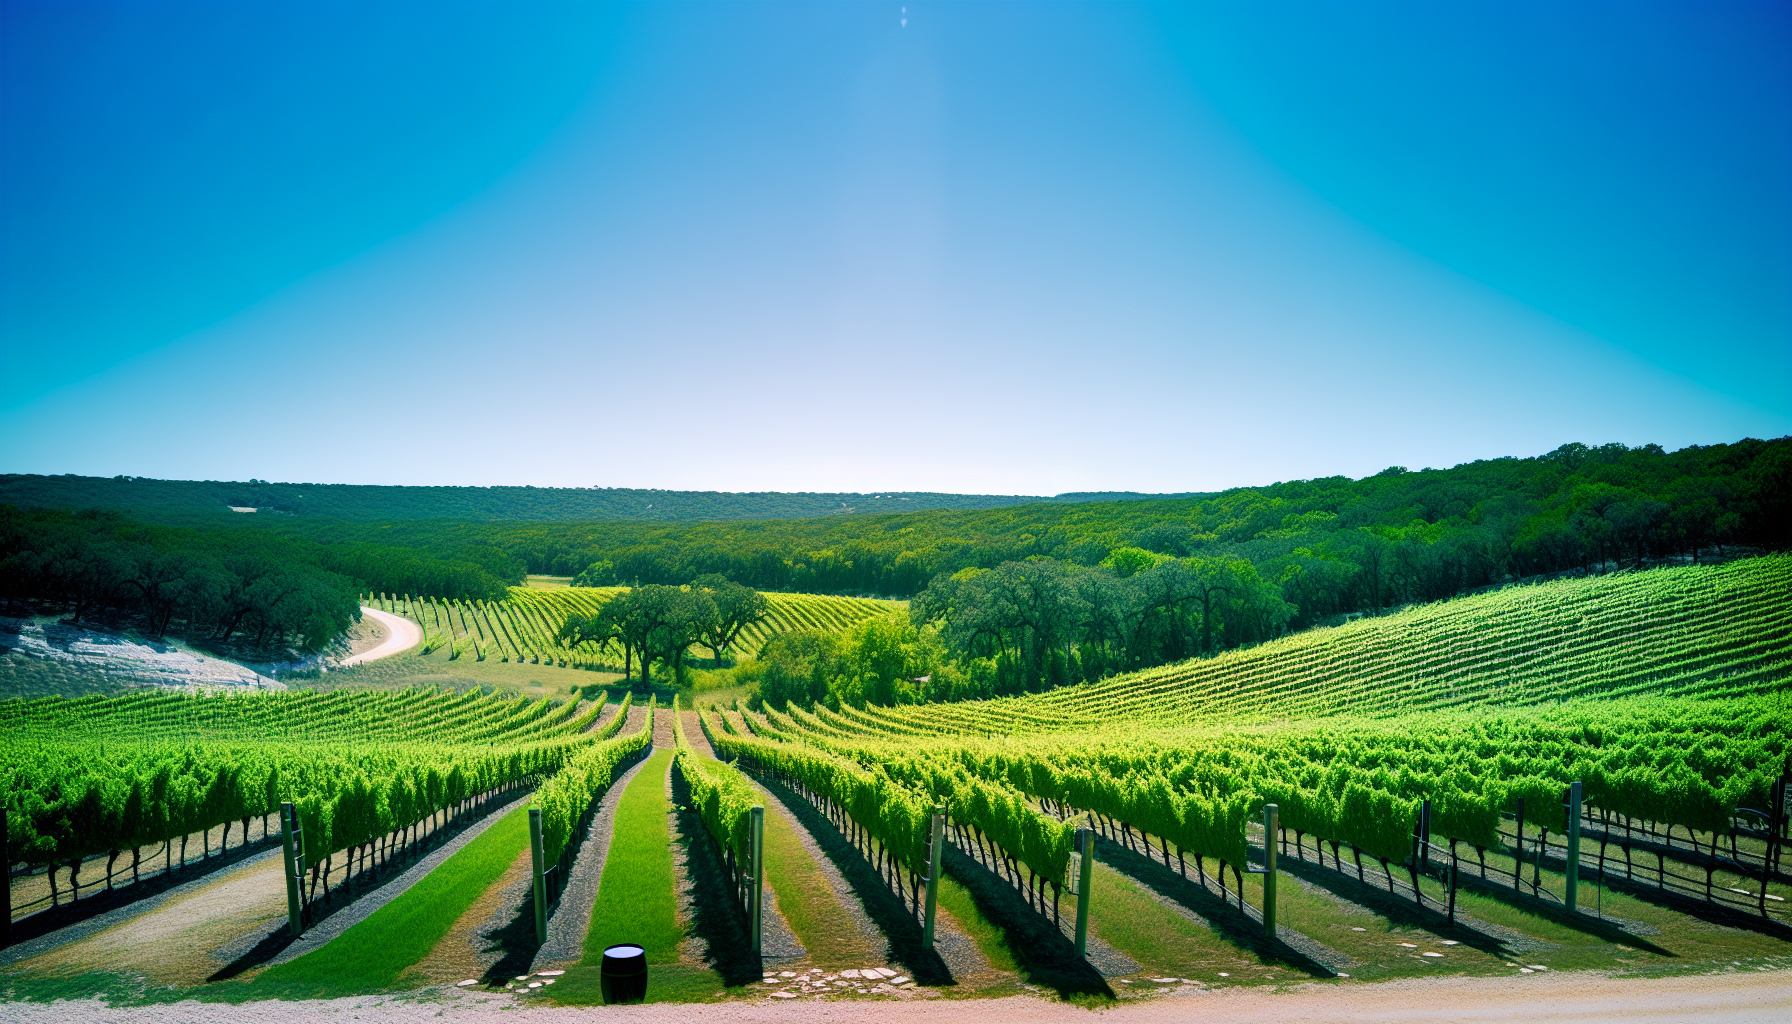 Vineyard in Texas Hill Country